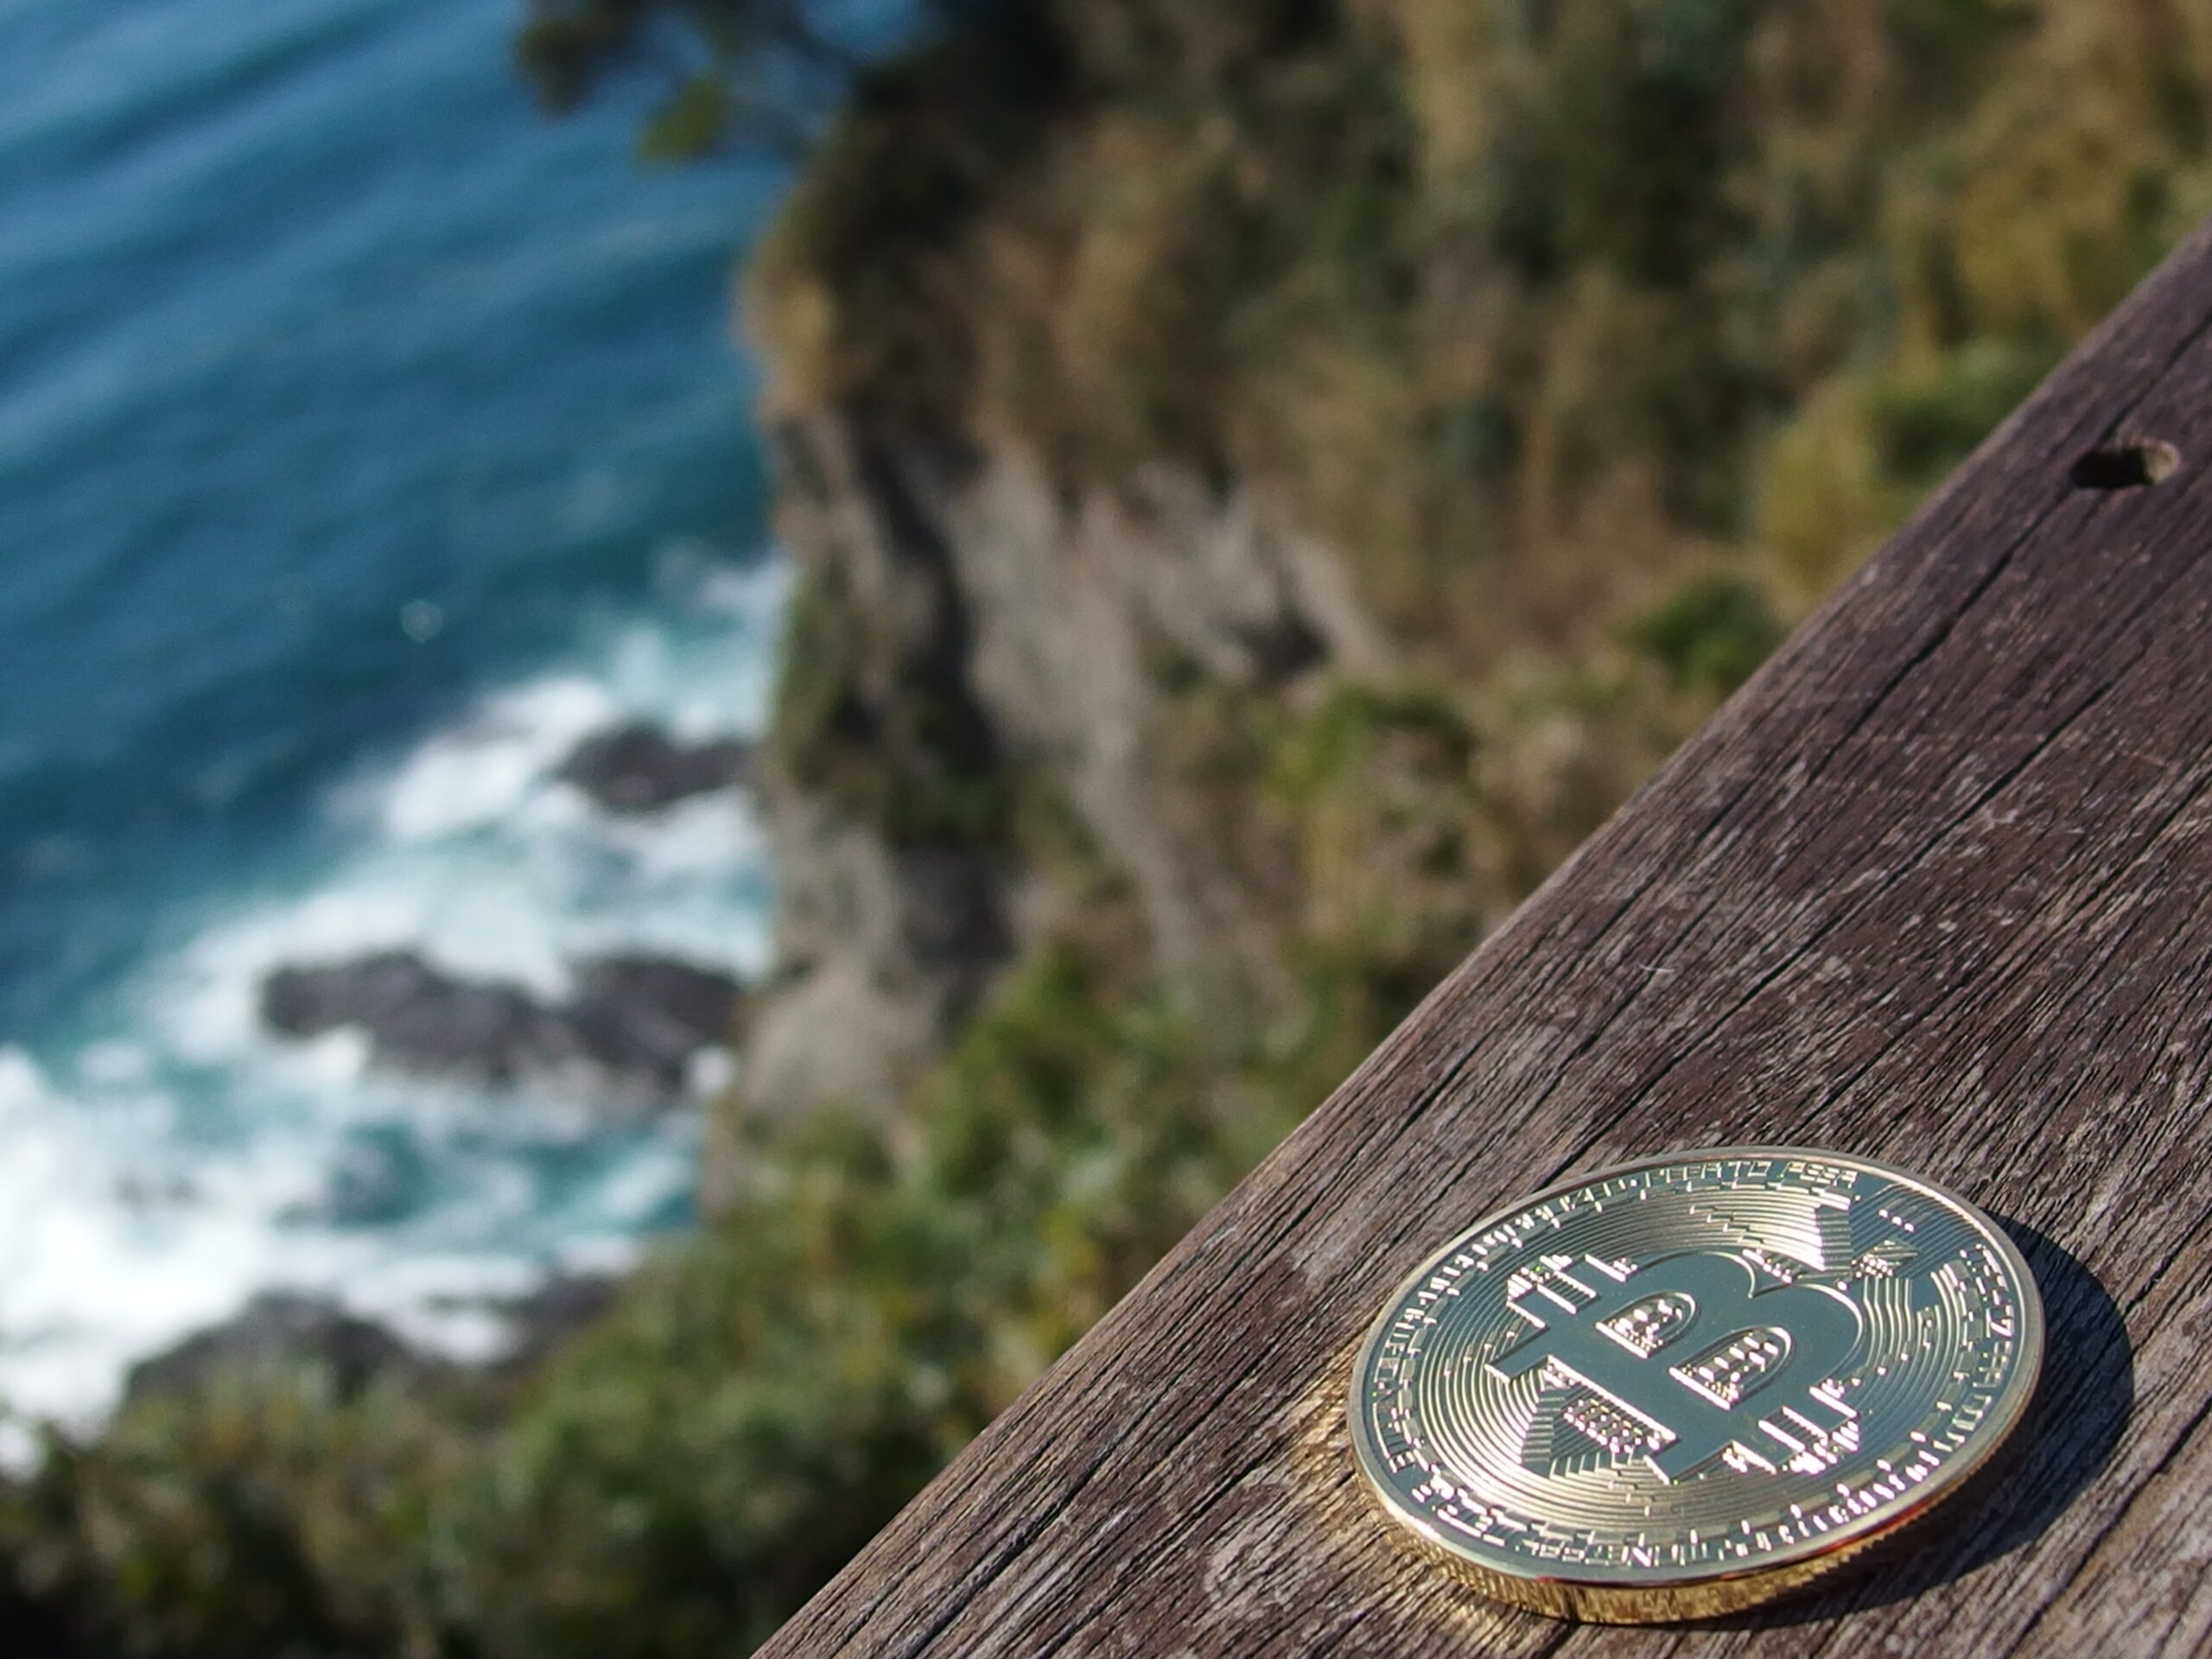 A Bitcoin Coin rests on a ledge overlooking a coastline